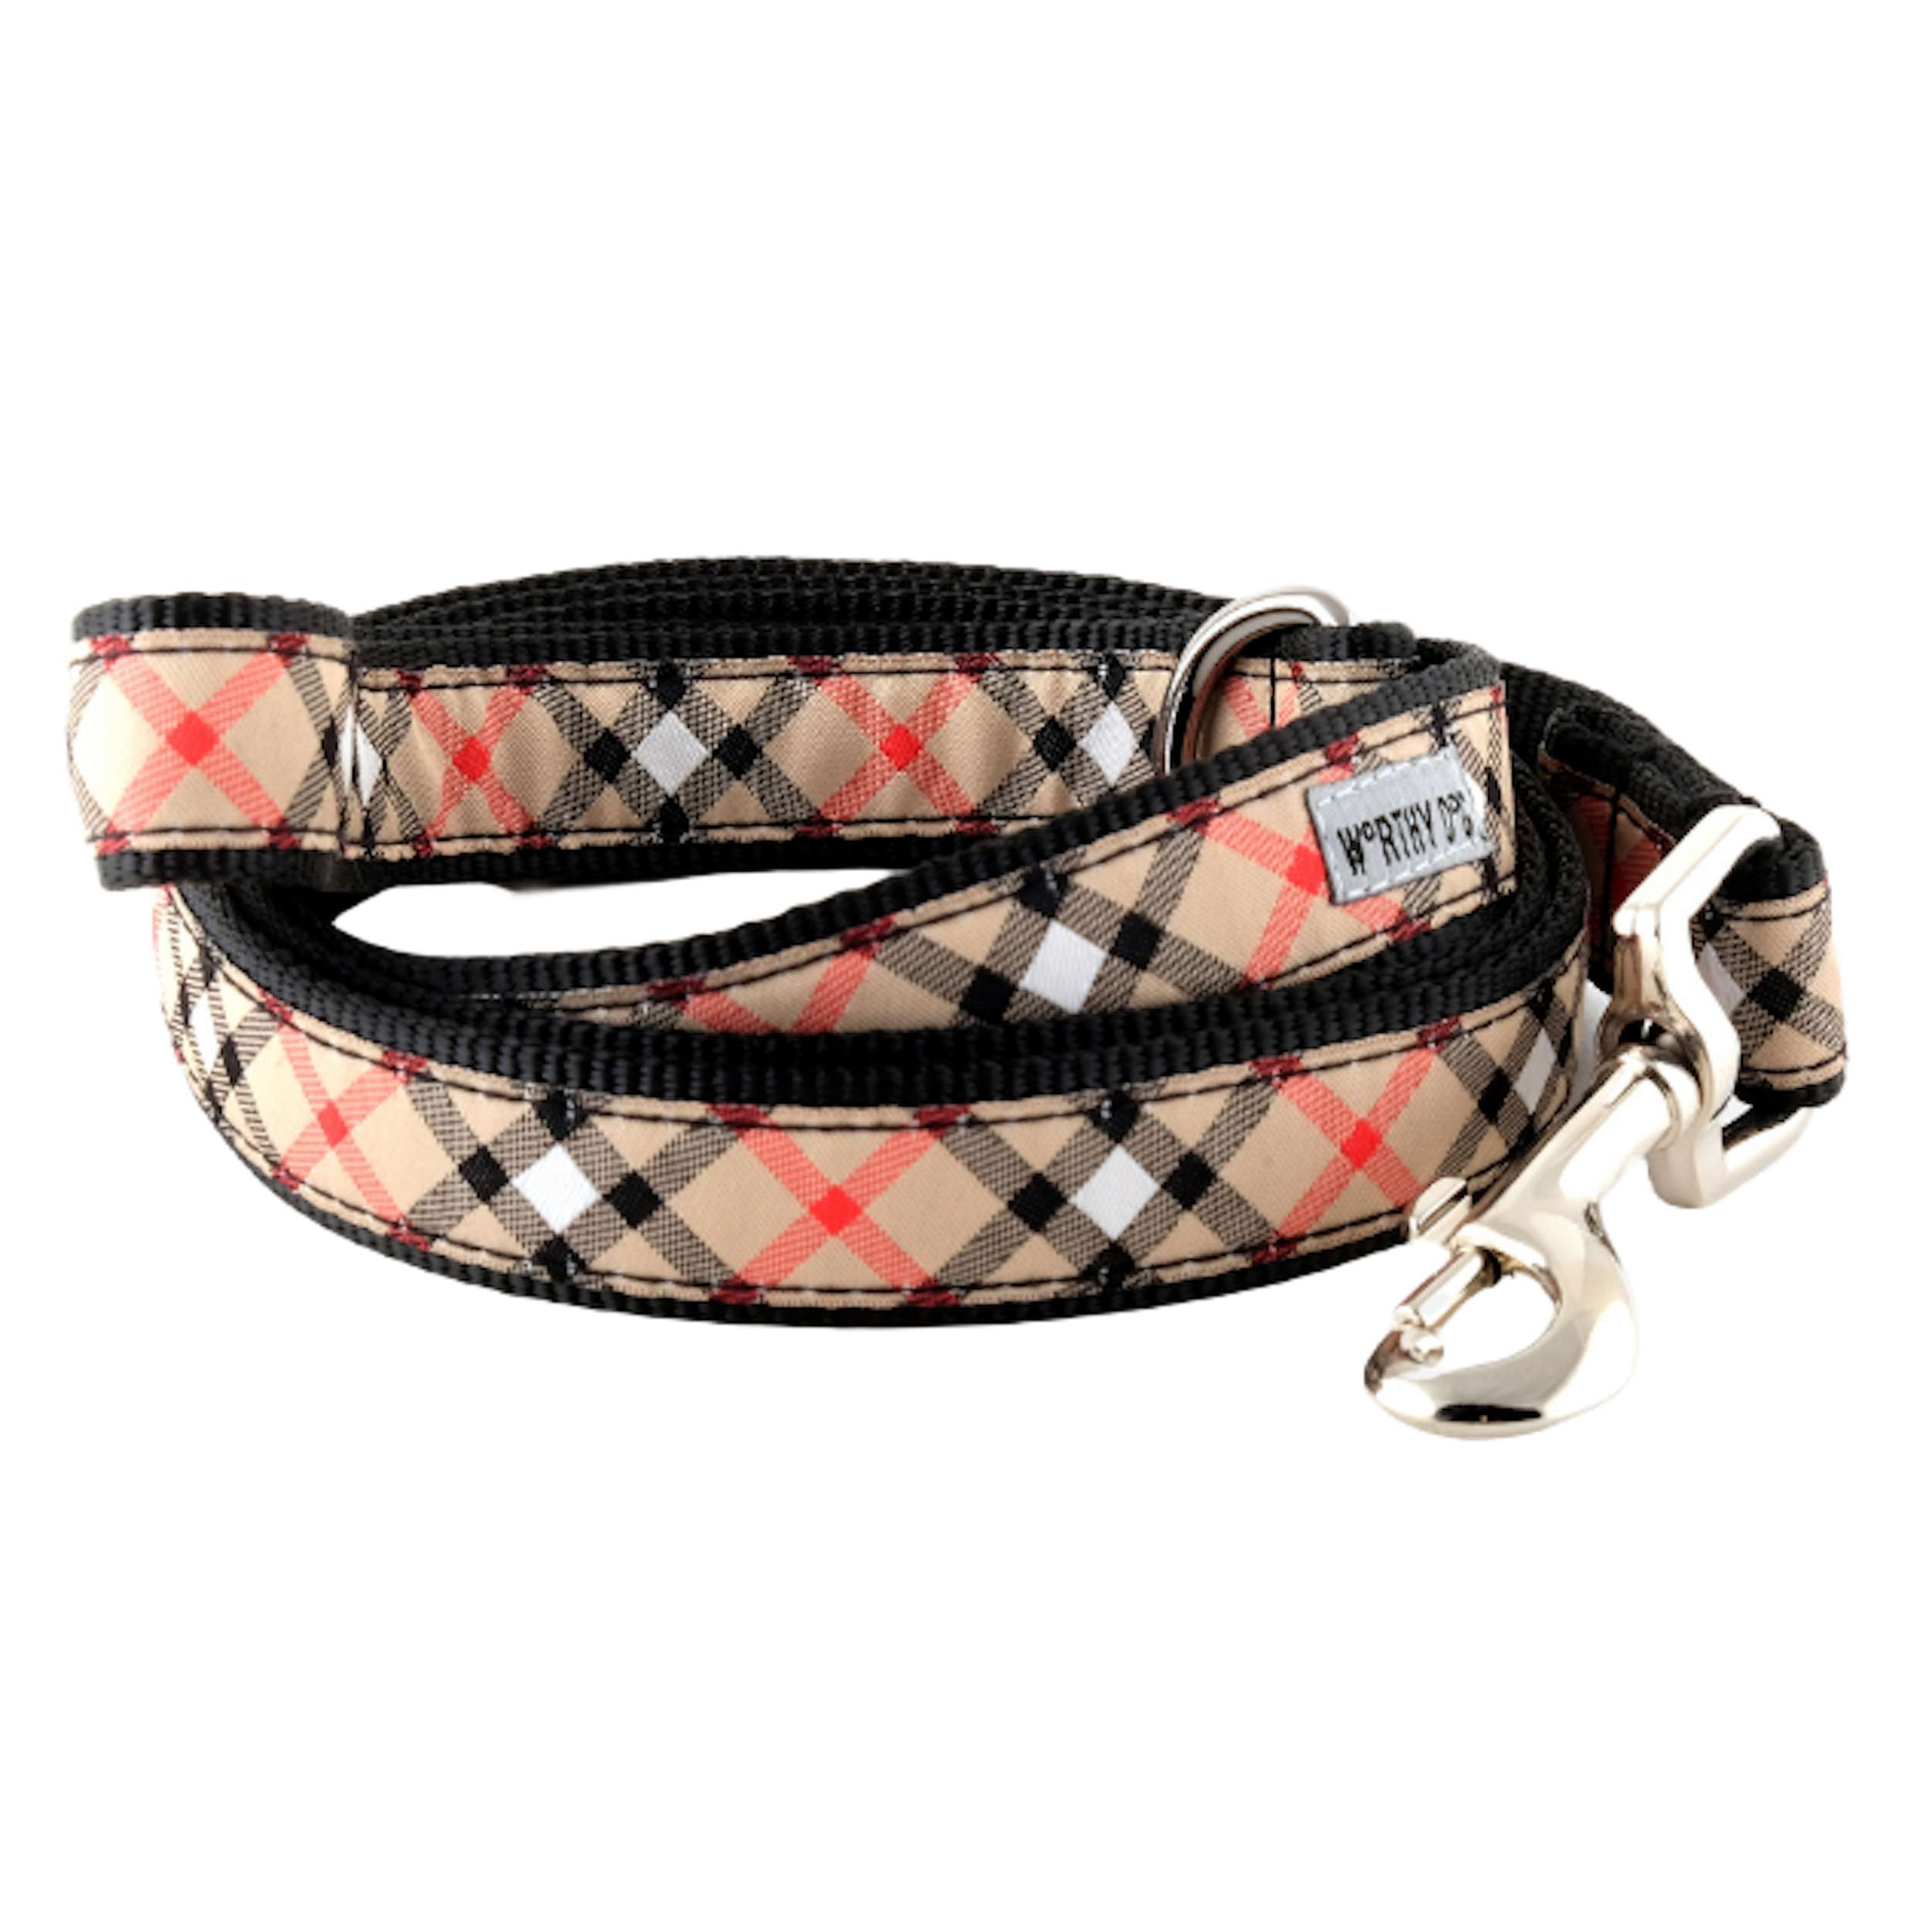 Burberry Check Faux Leather Dog Collar in Multicoloured - Burberry